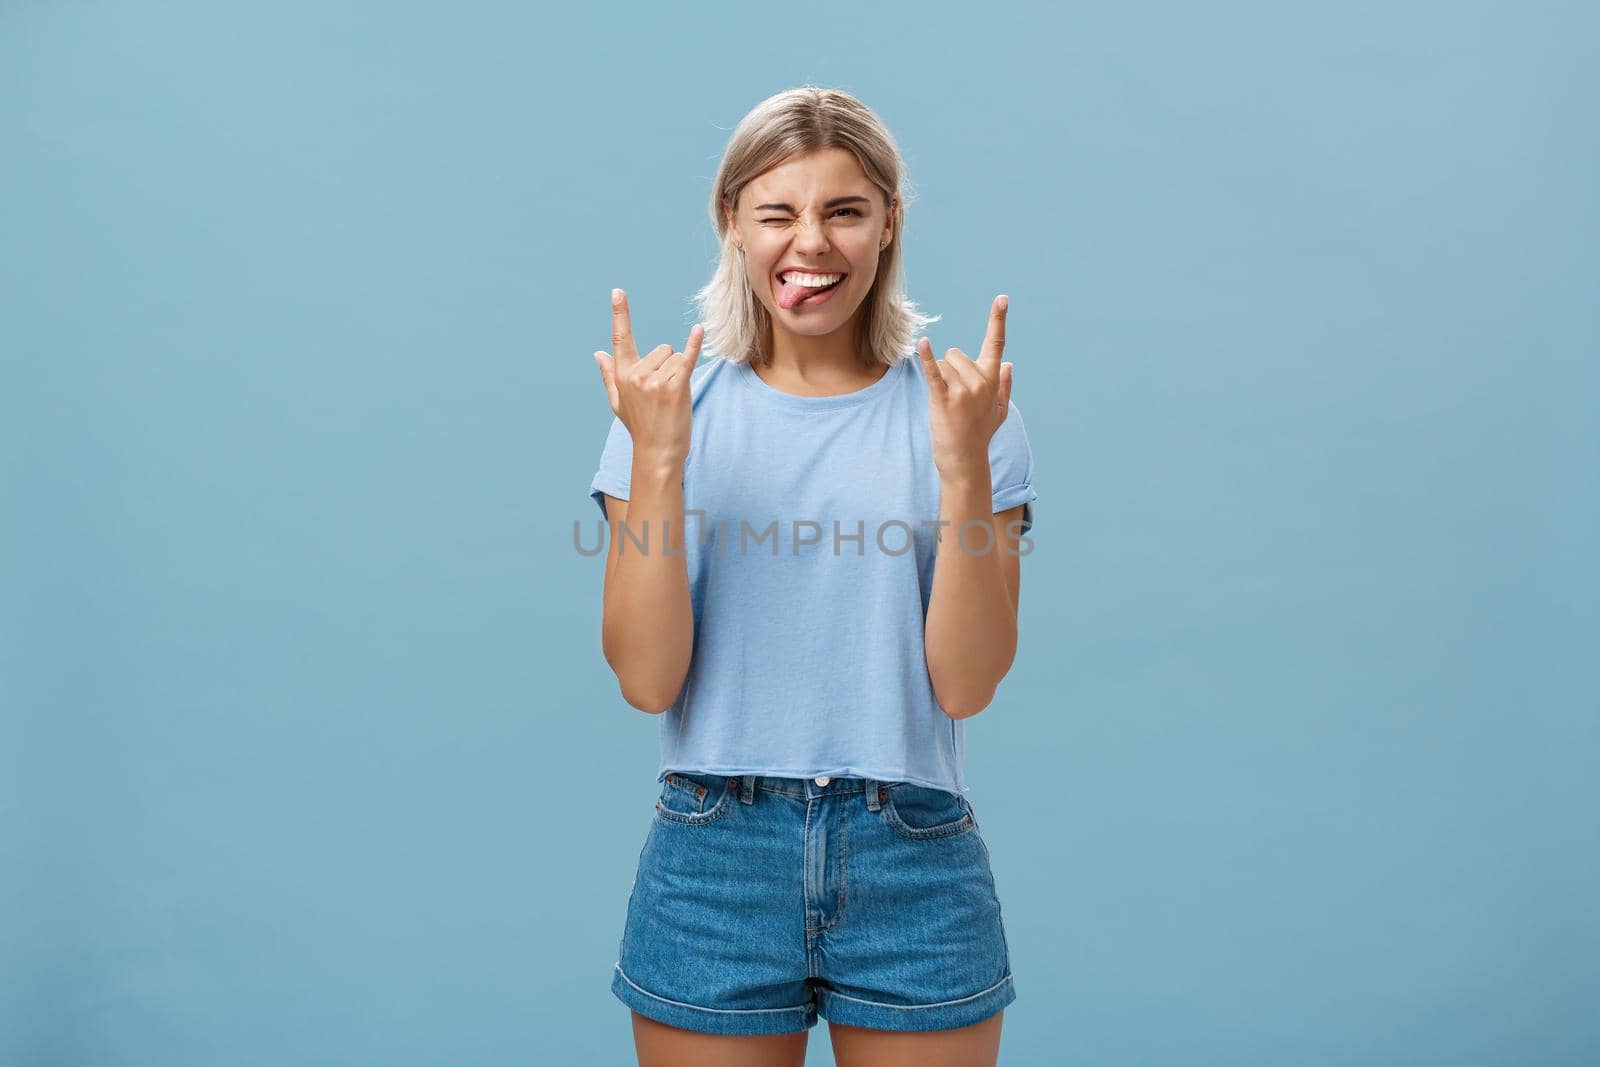 Let us rock this party. Portrait of joyful good-looking and carefree young artistic female musician with blond hair showing heavy metal gesture sticking out tongue and winking amused, having fun.